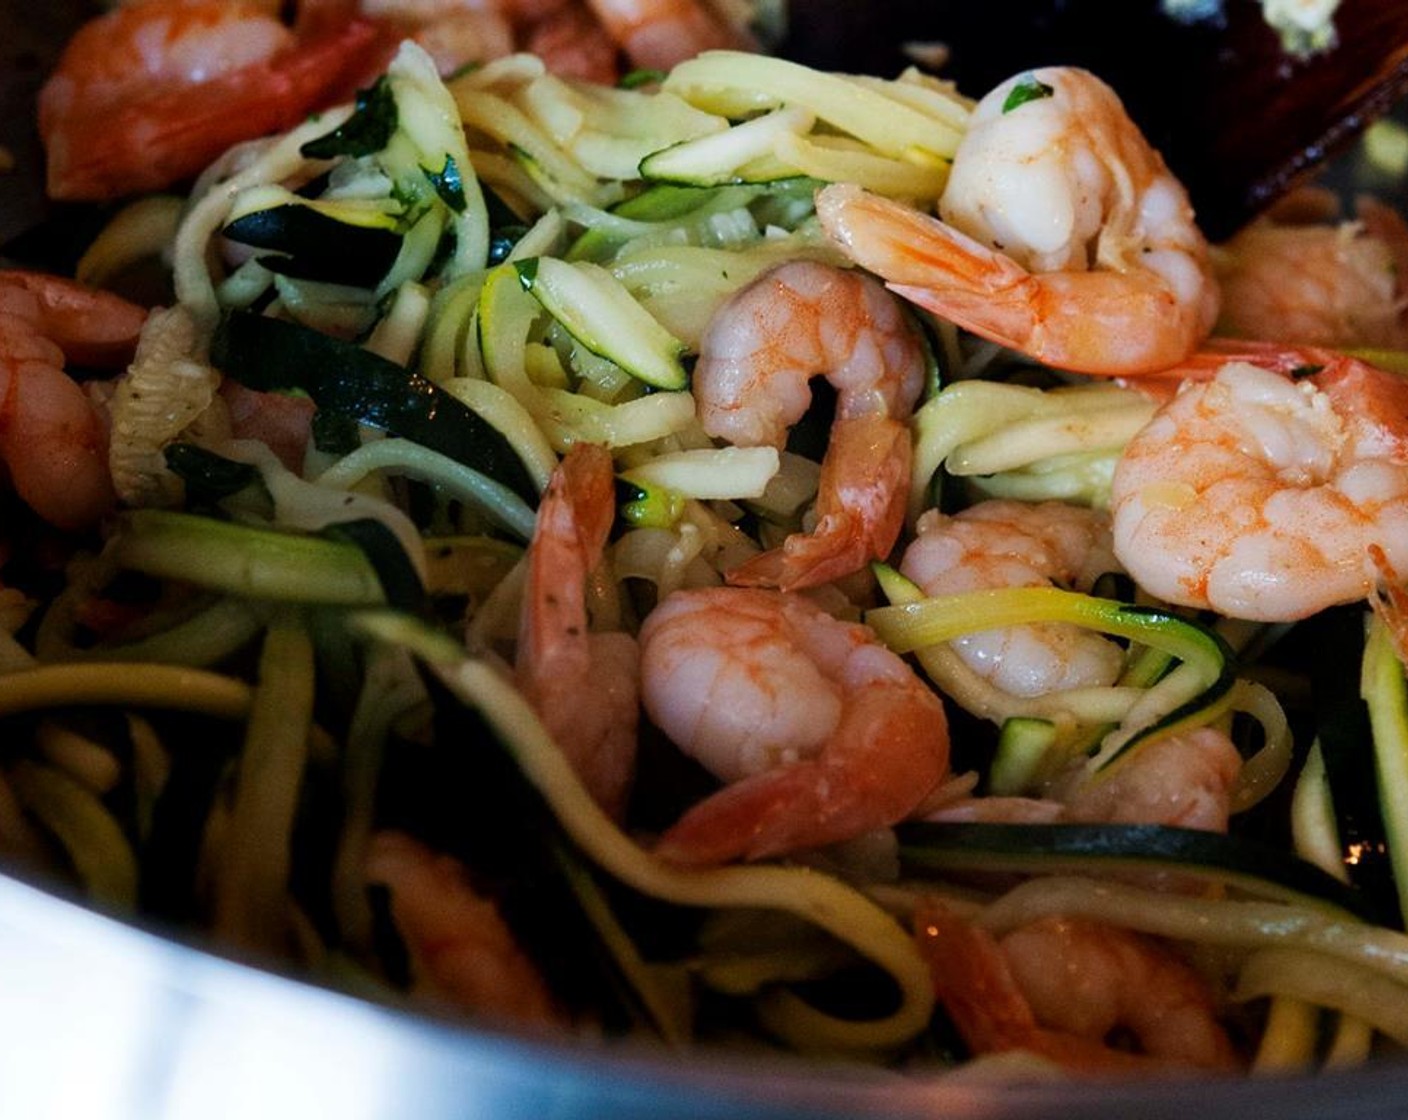 step 7 Add the zucchini noodles to the shrimps and stir on low heat for a few minutes. You want the zucchini to be slightly cooked but not smashed.